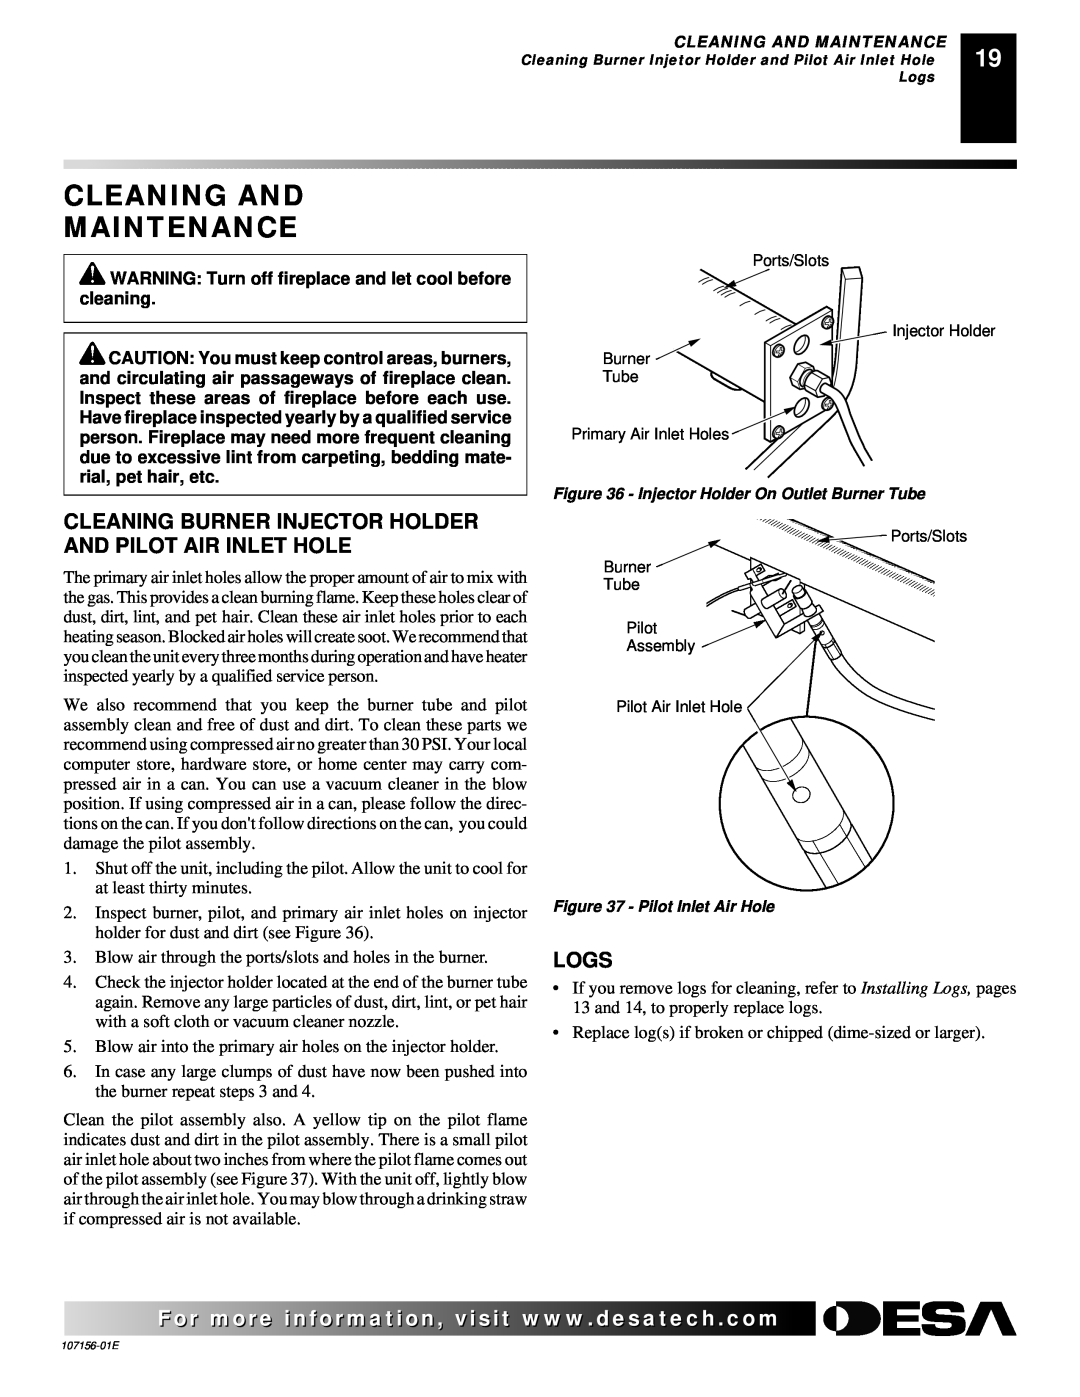 Vanguard Heating 107156-01E.pdf installation manual Cleaning And Maintenance, Logs 